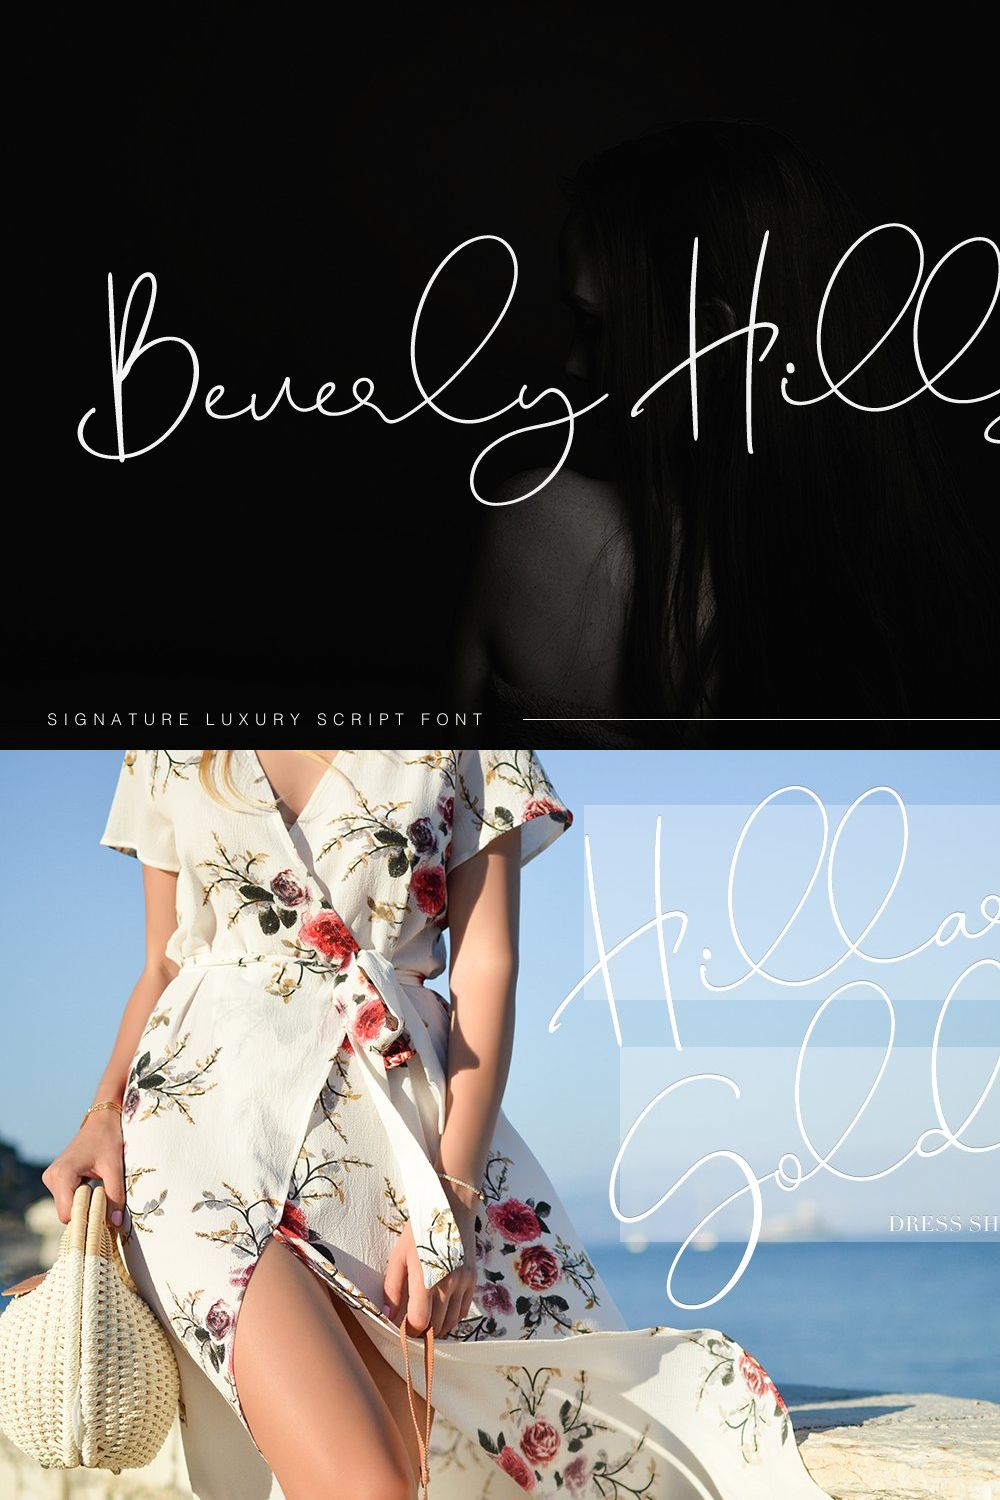 Beverly Hills pinterest preview image.